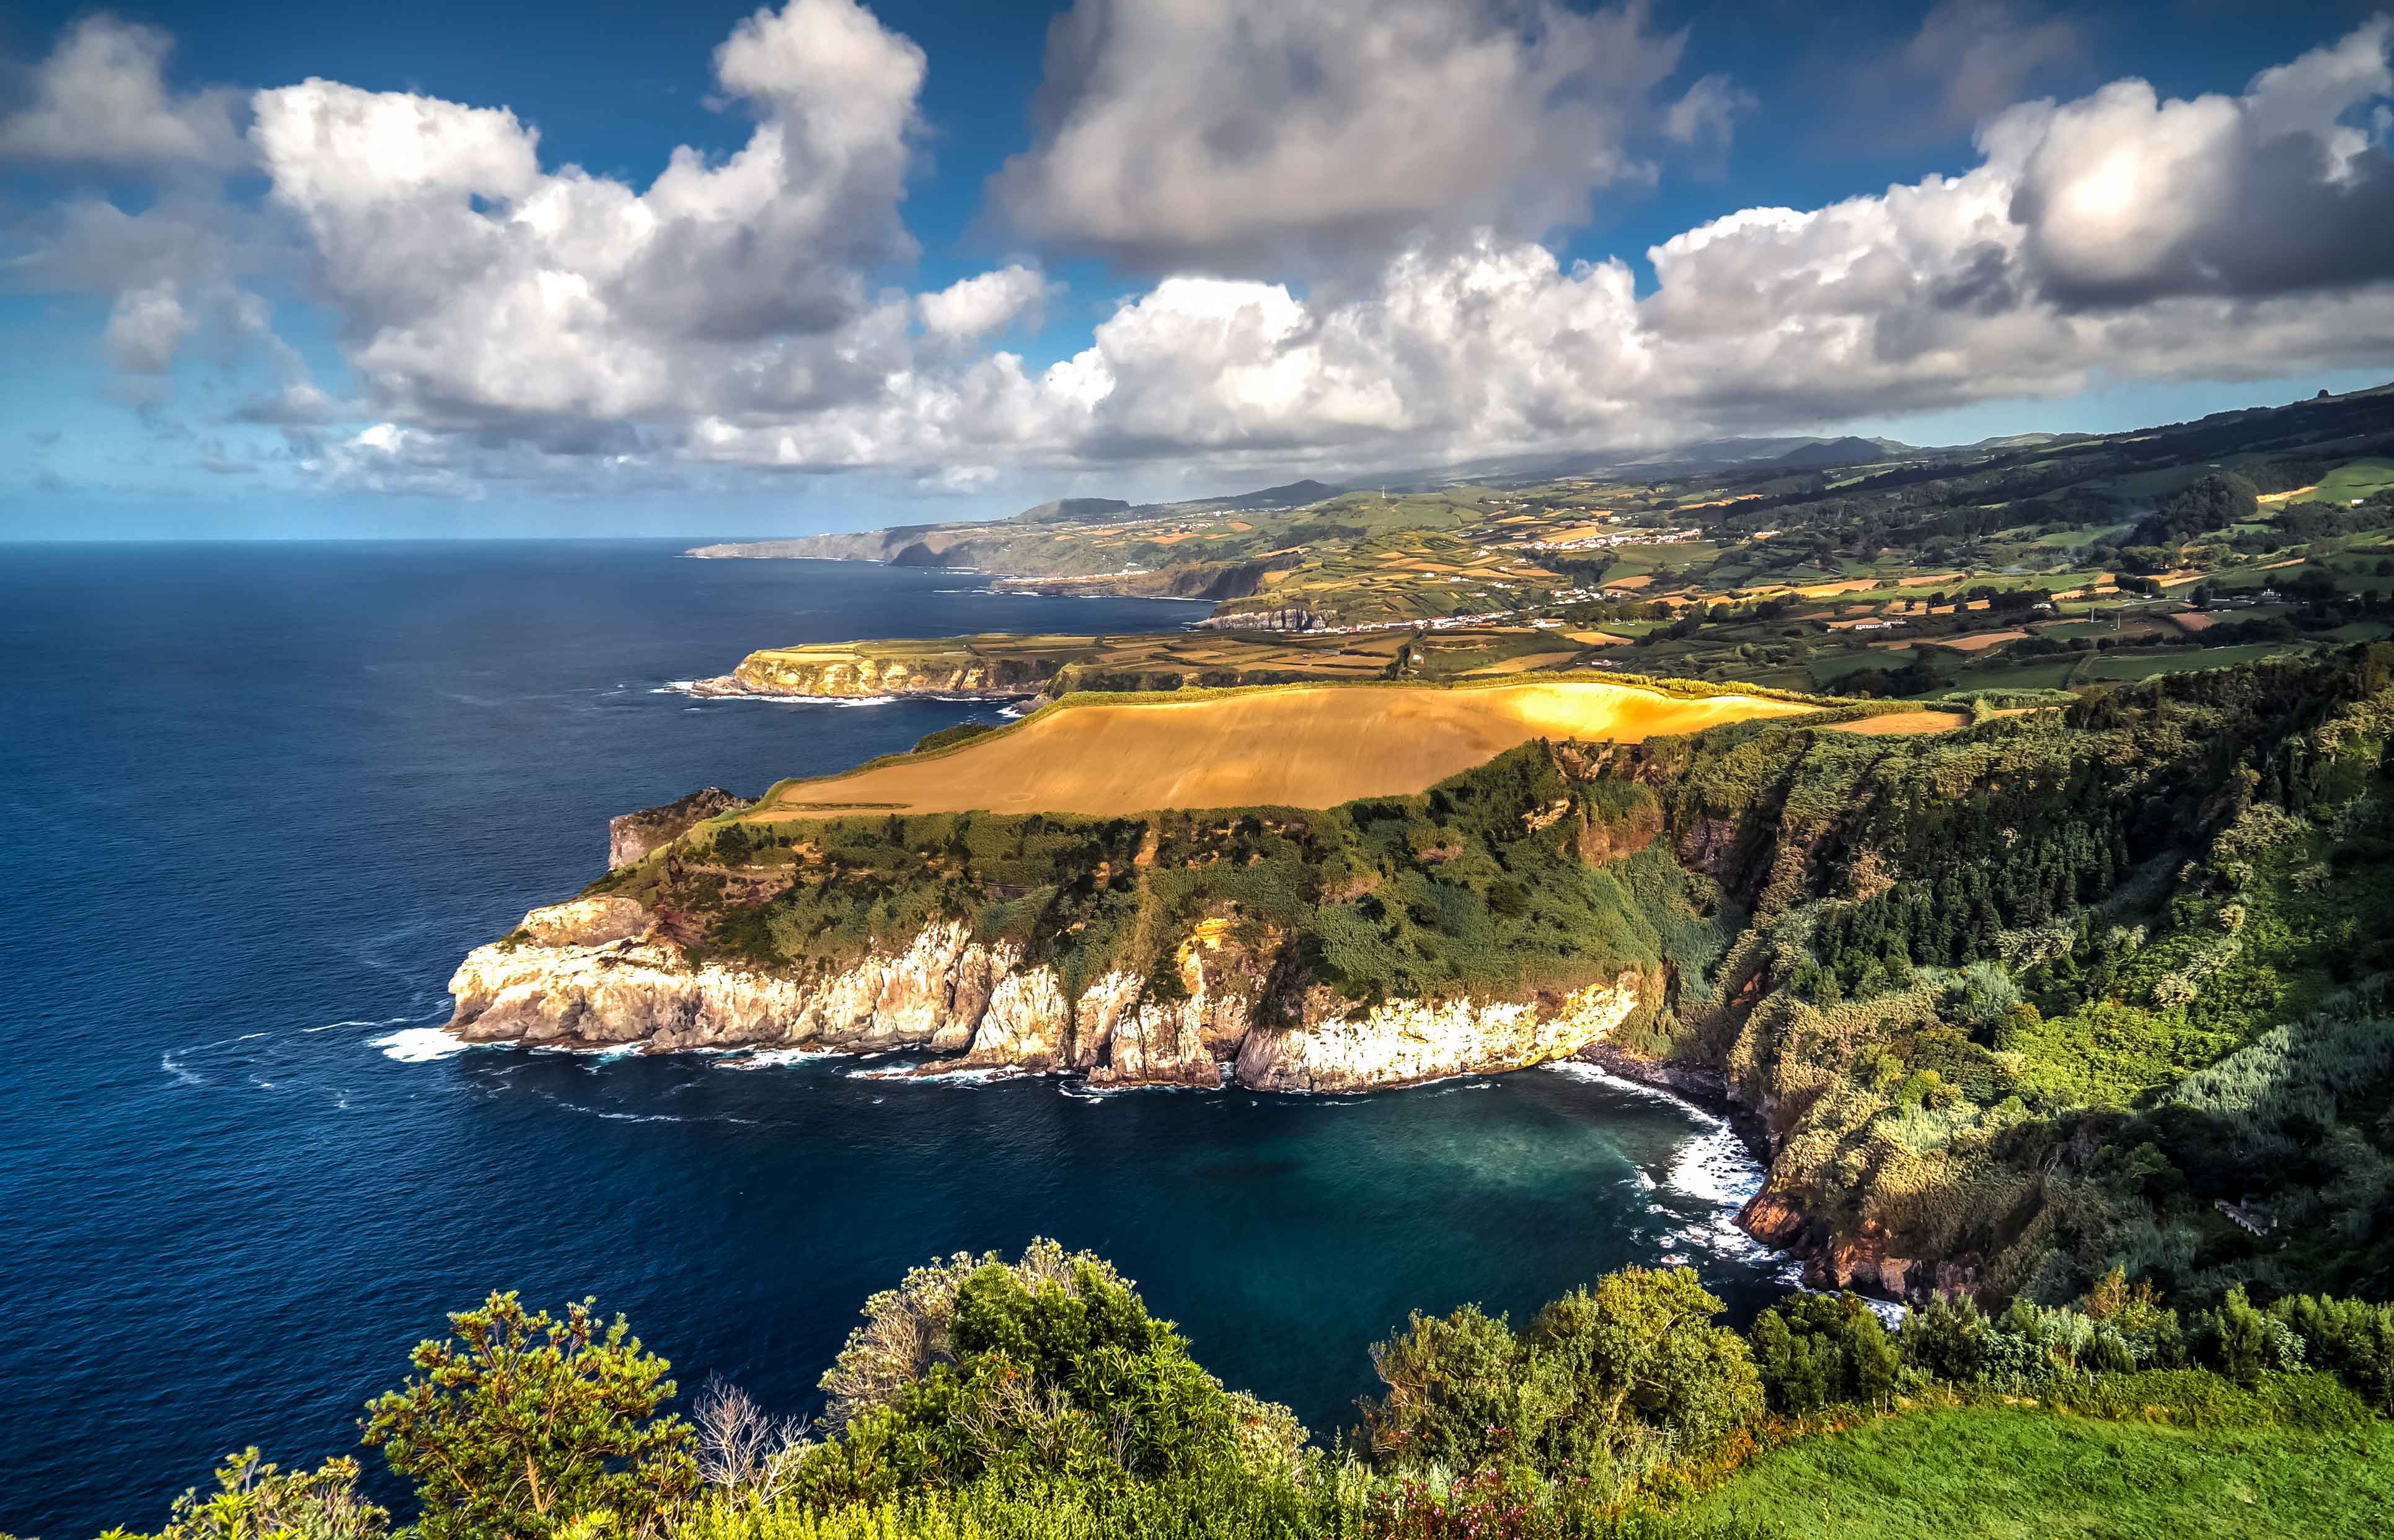 A viewpoint on Sao Miguel Island on the Azores